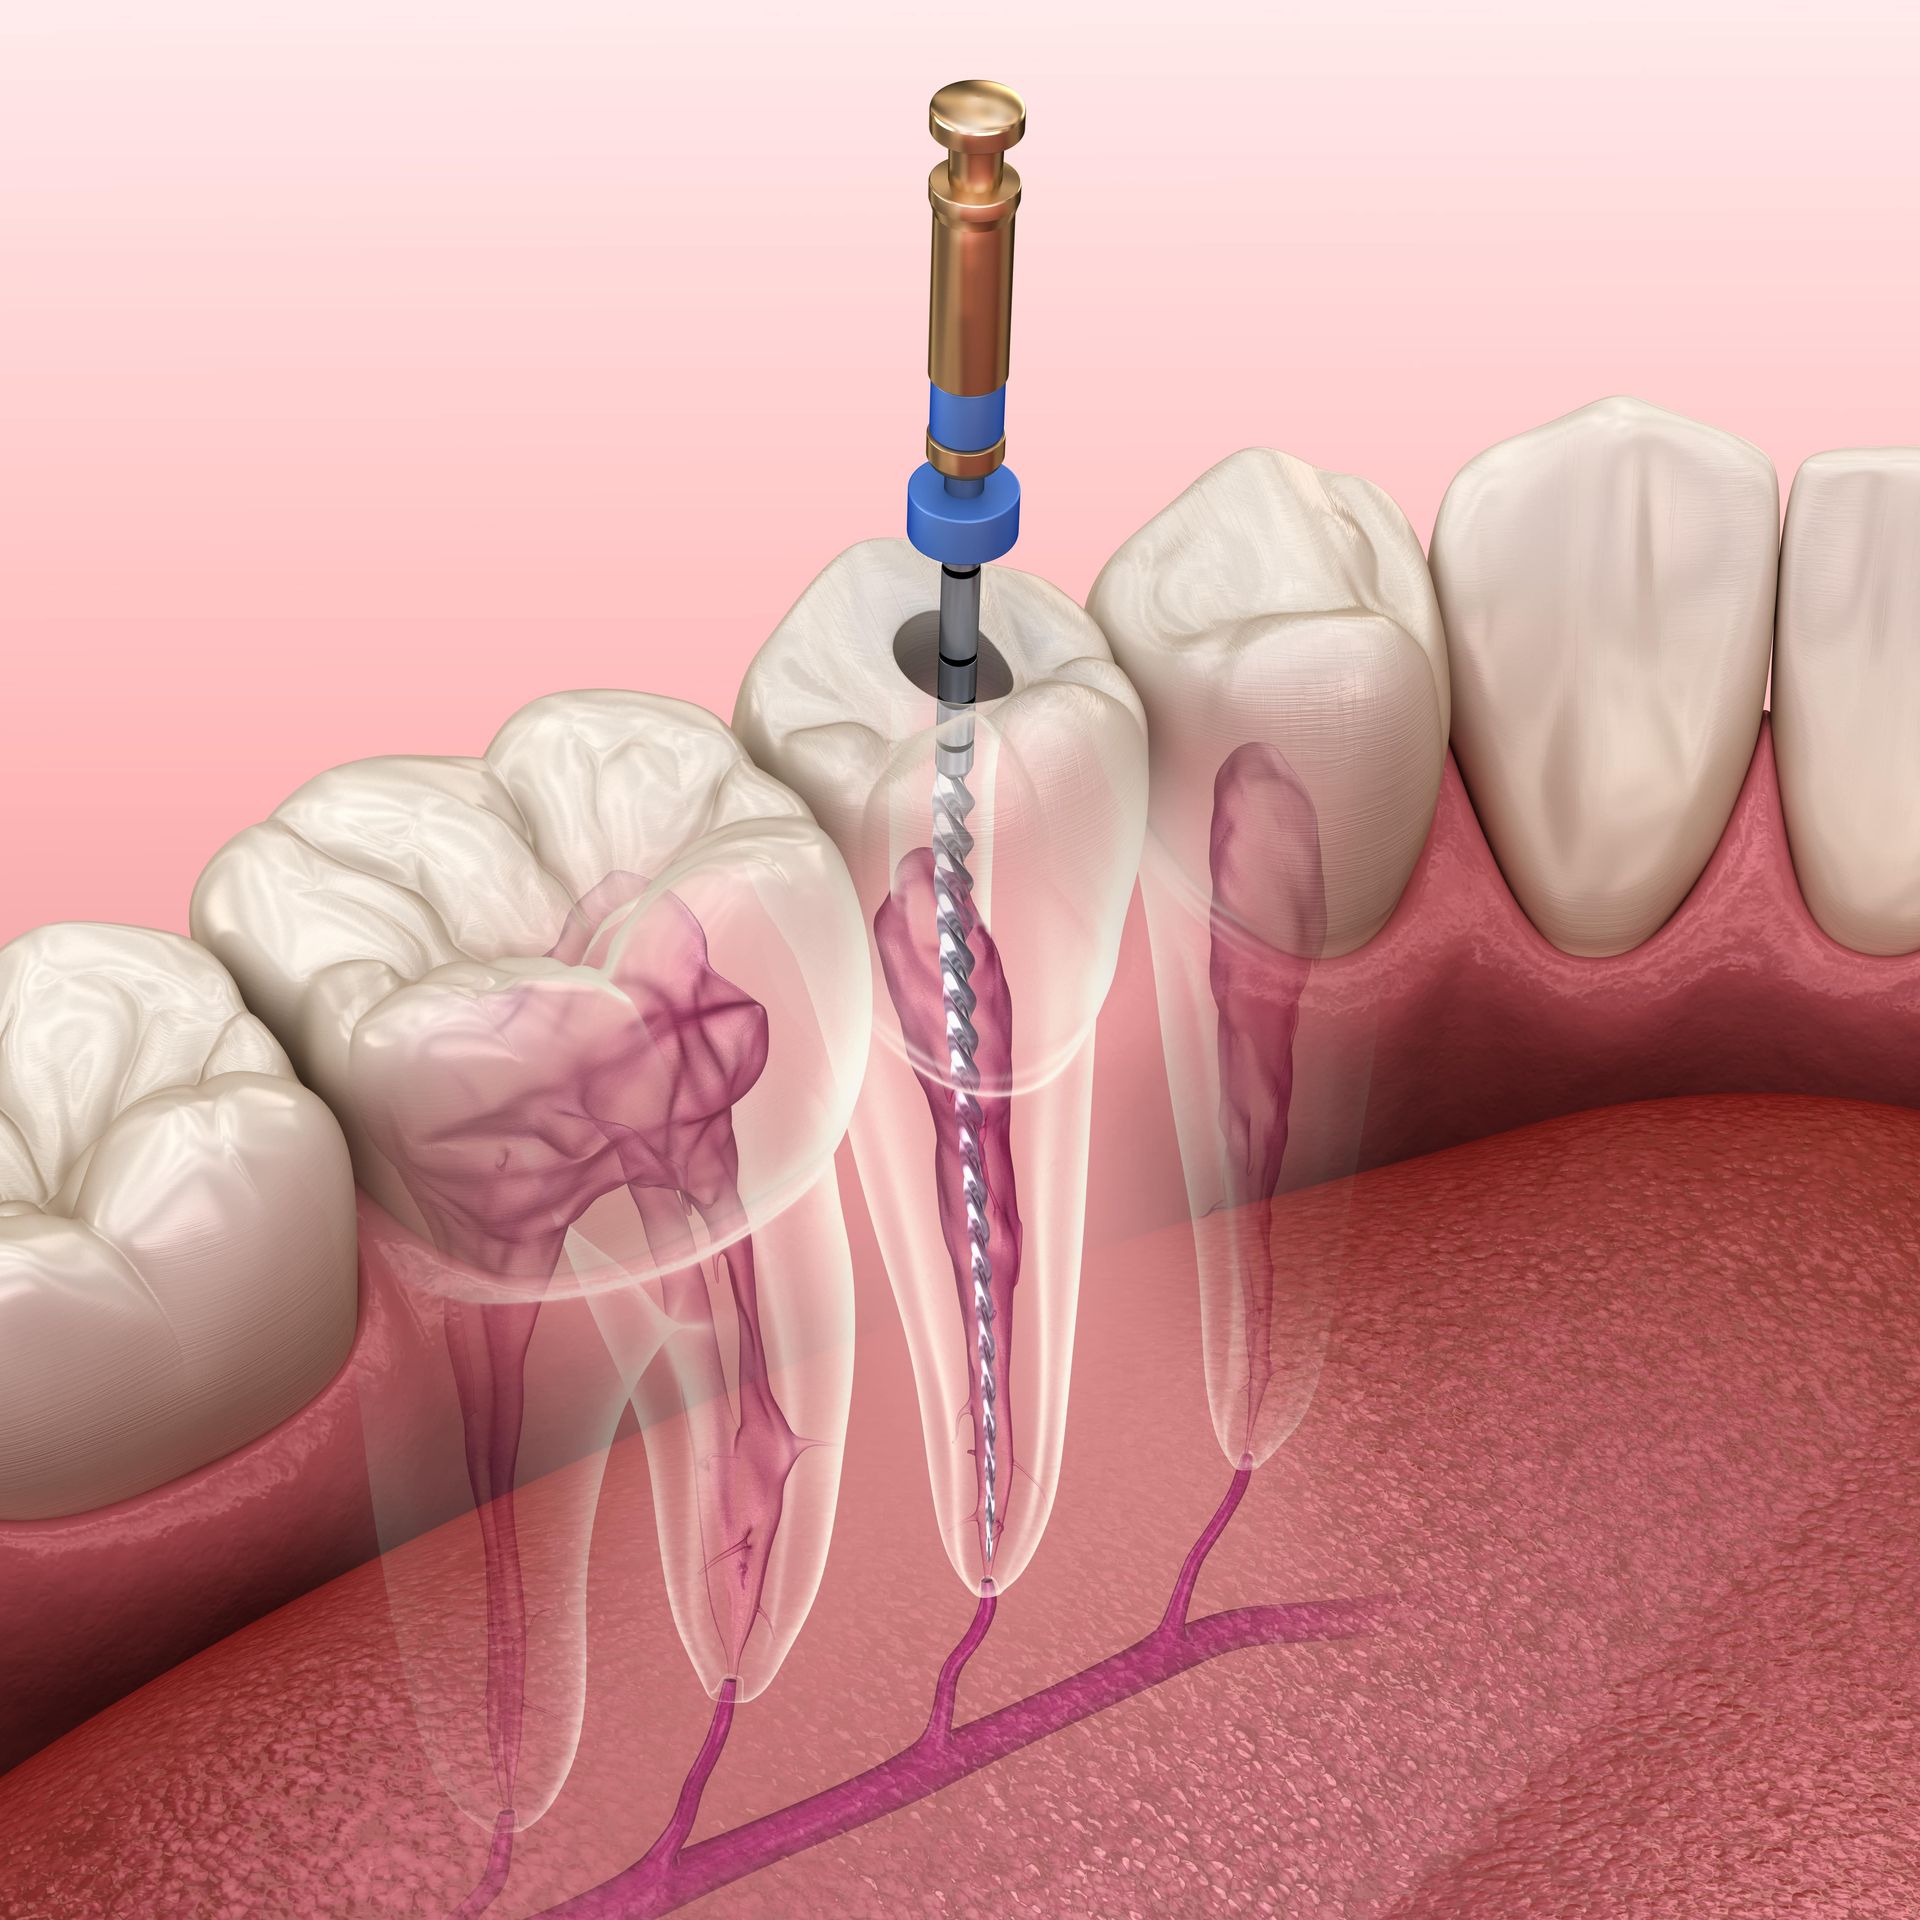 A computer generated image of a tooth root being cleaned with an instrument